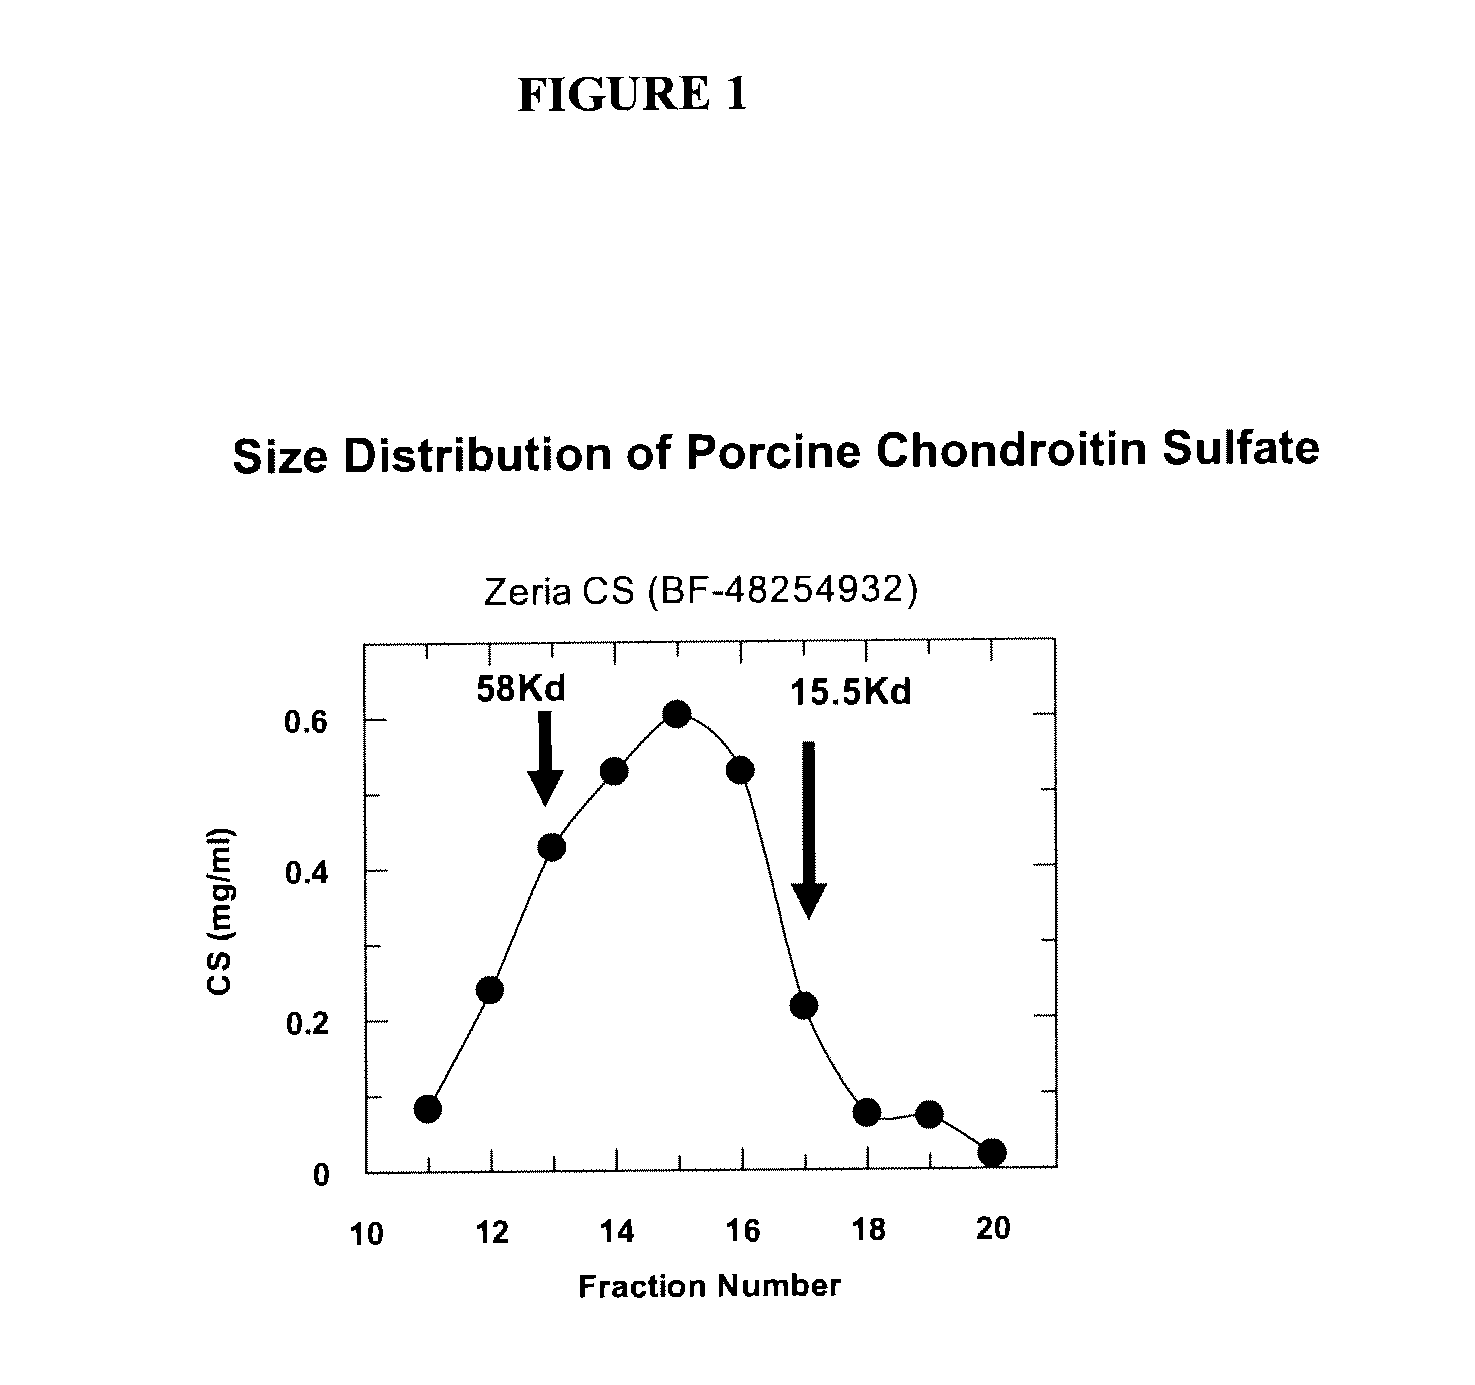 Microbial-derived chondroitin sulfate